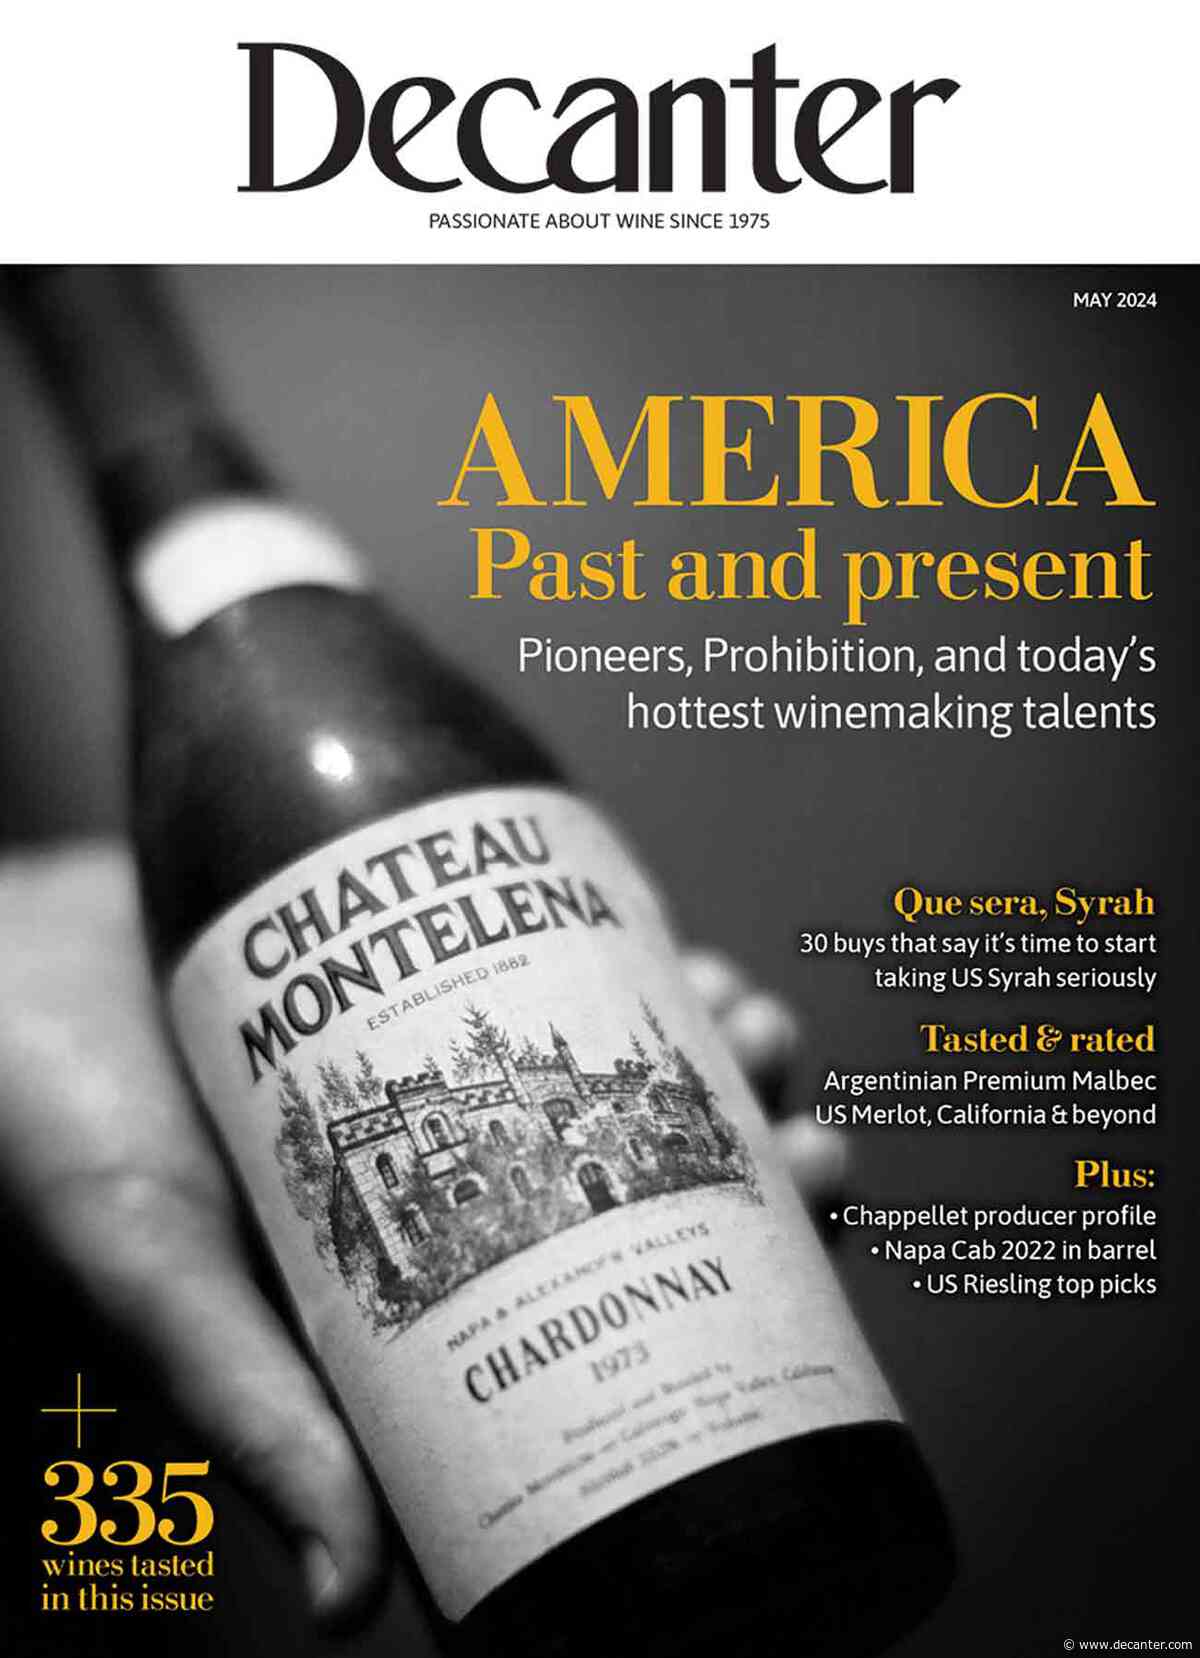 Decanter magazine latest issue: May 2024